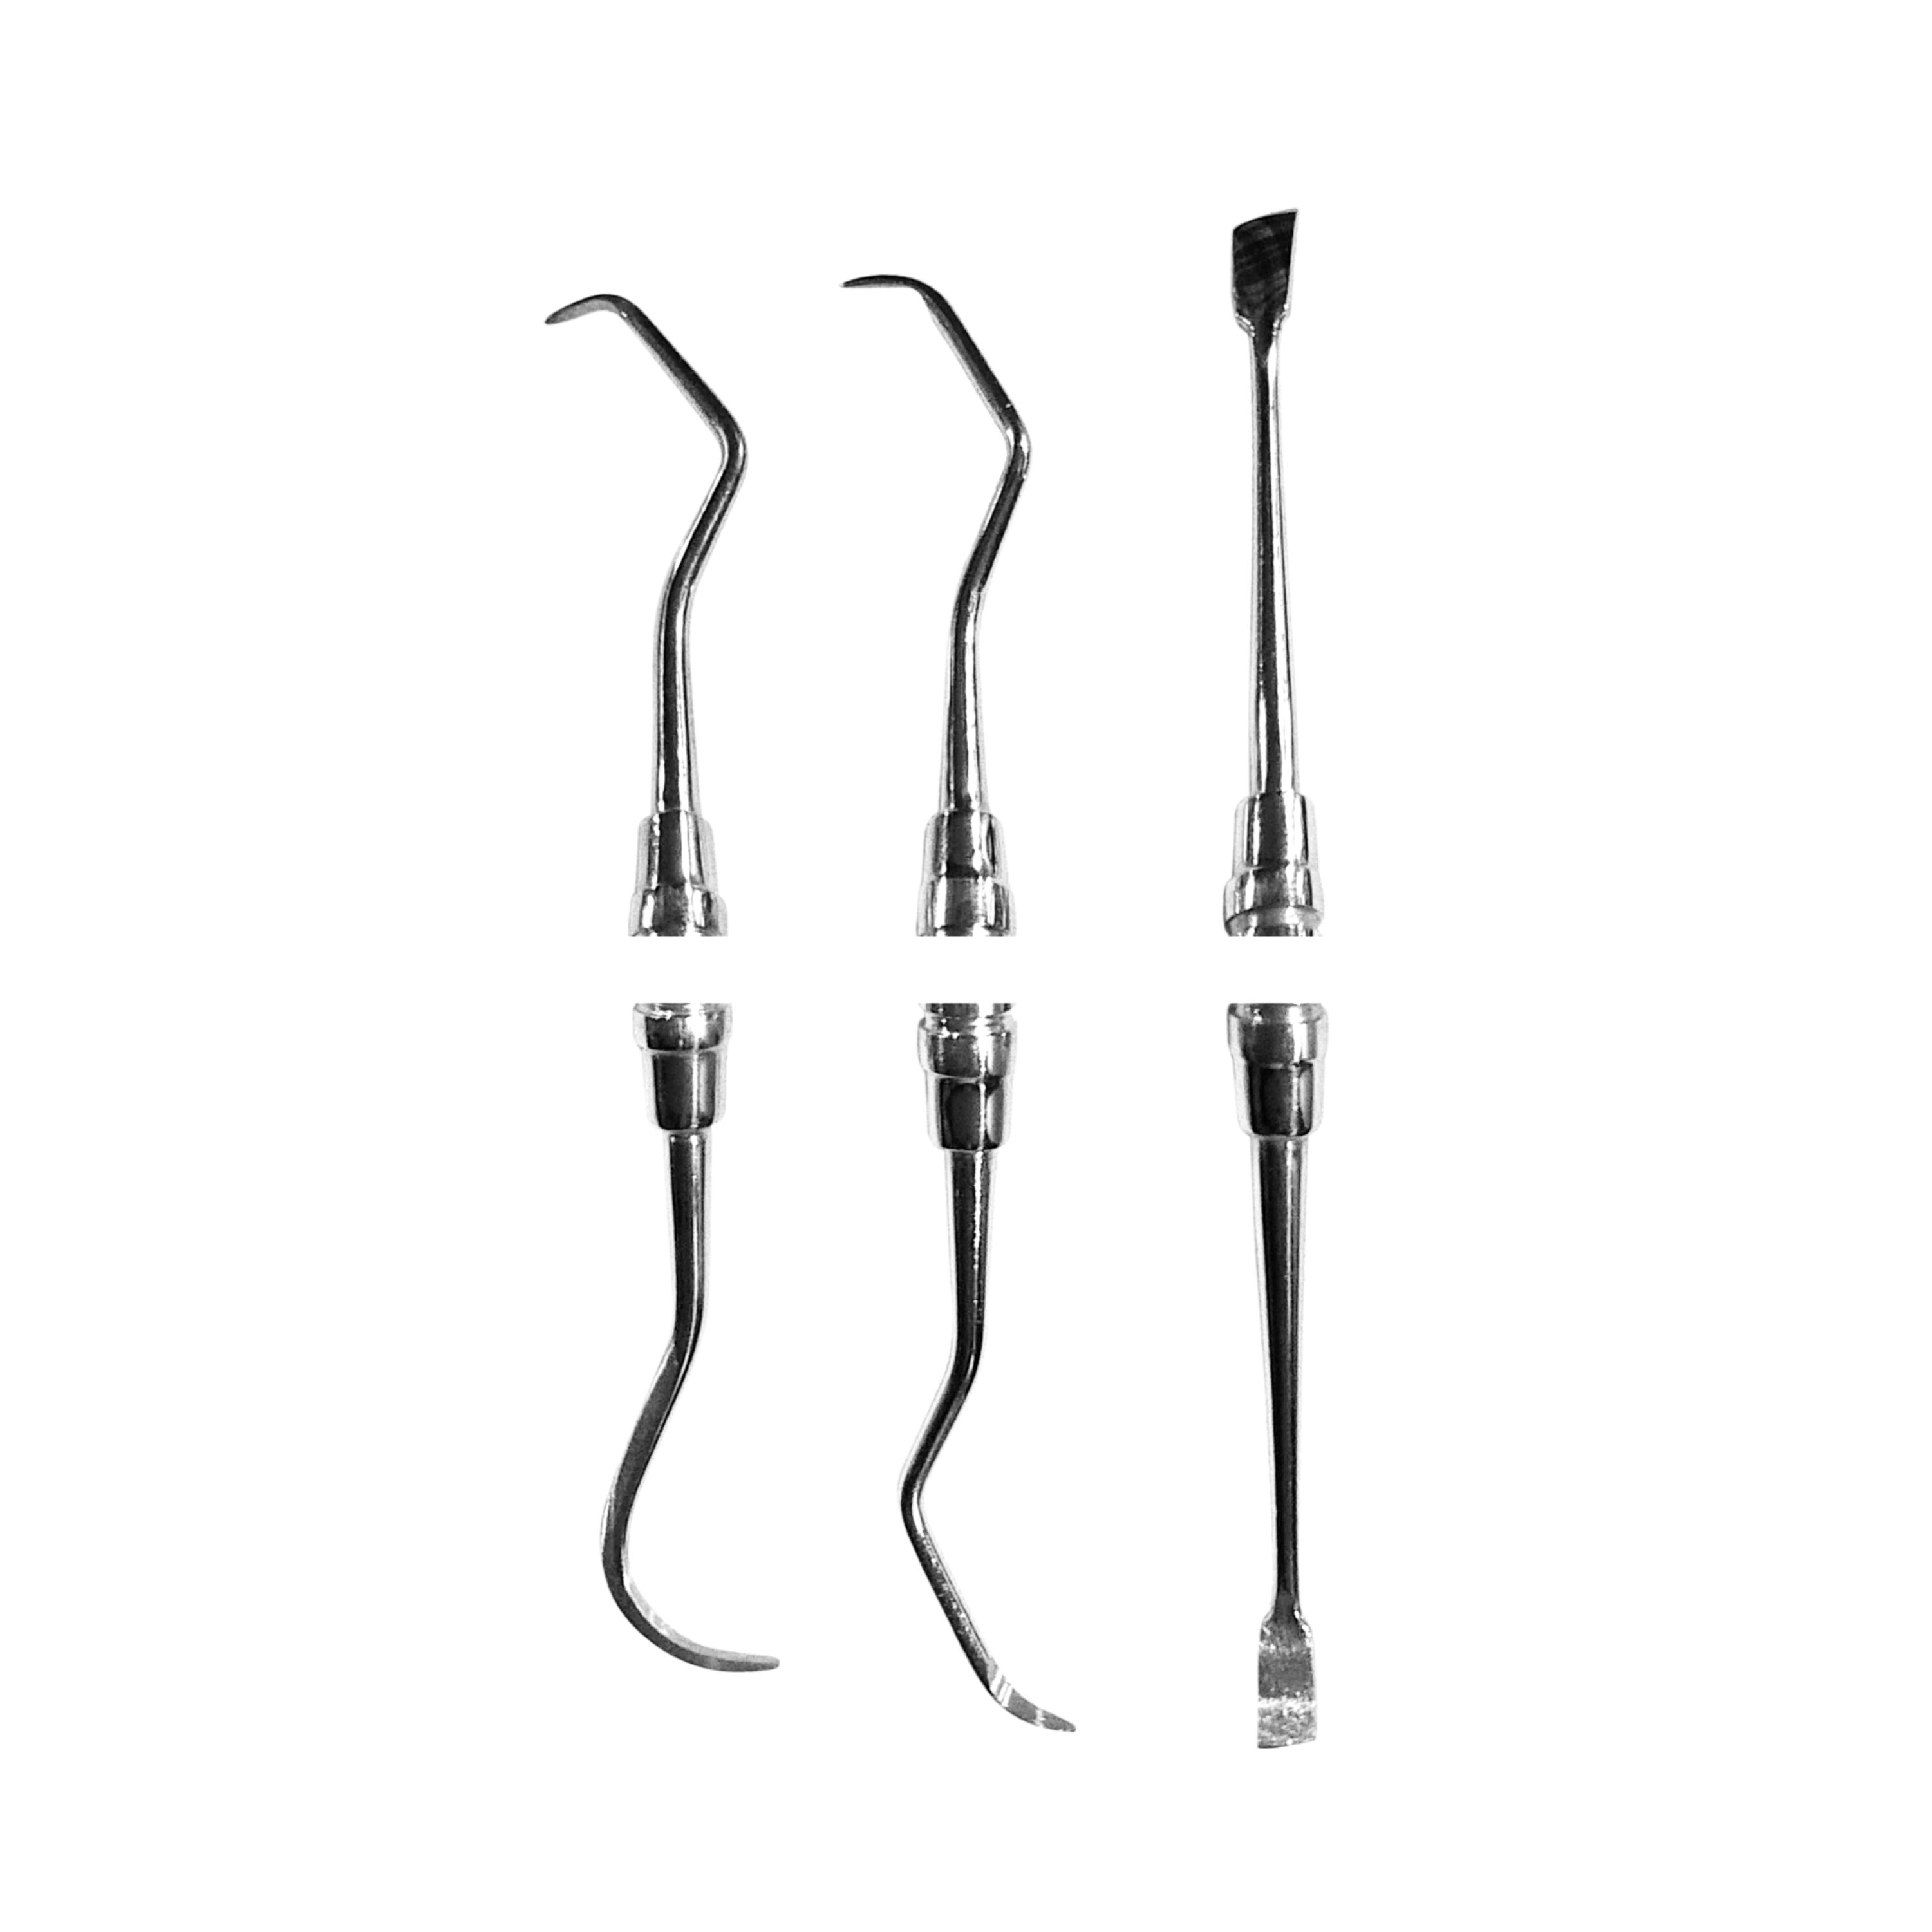 Trust & Care Manipal Scalers Set Of 3-Pcs